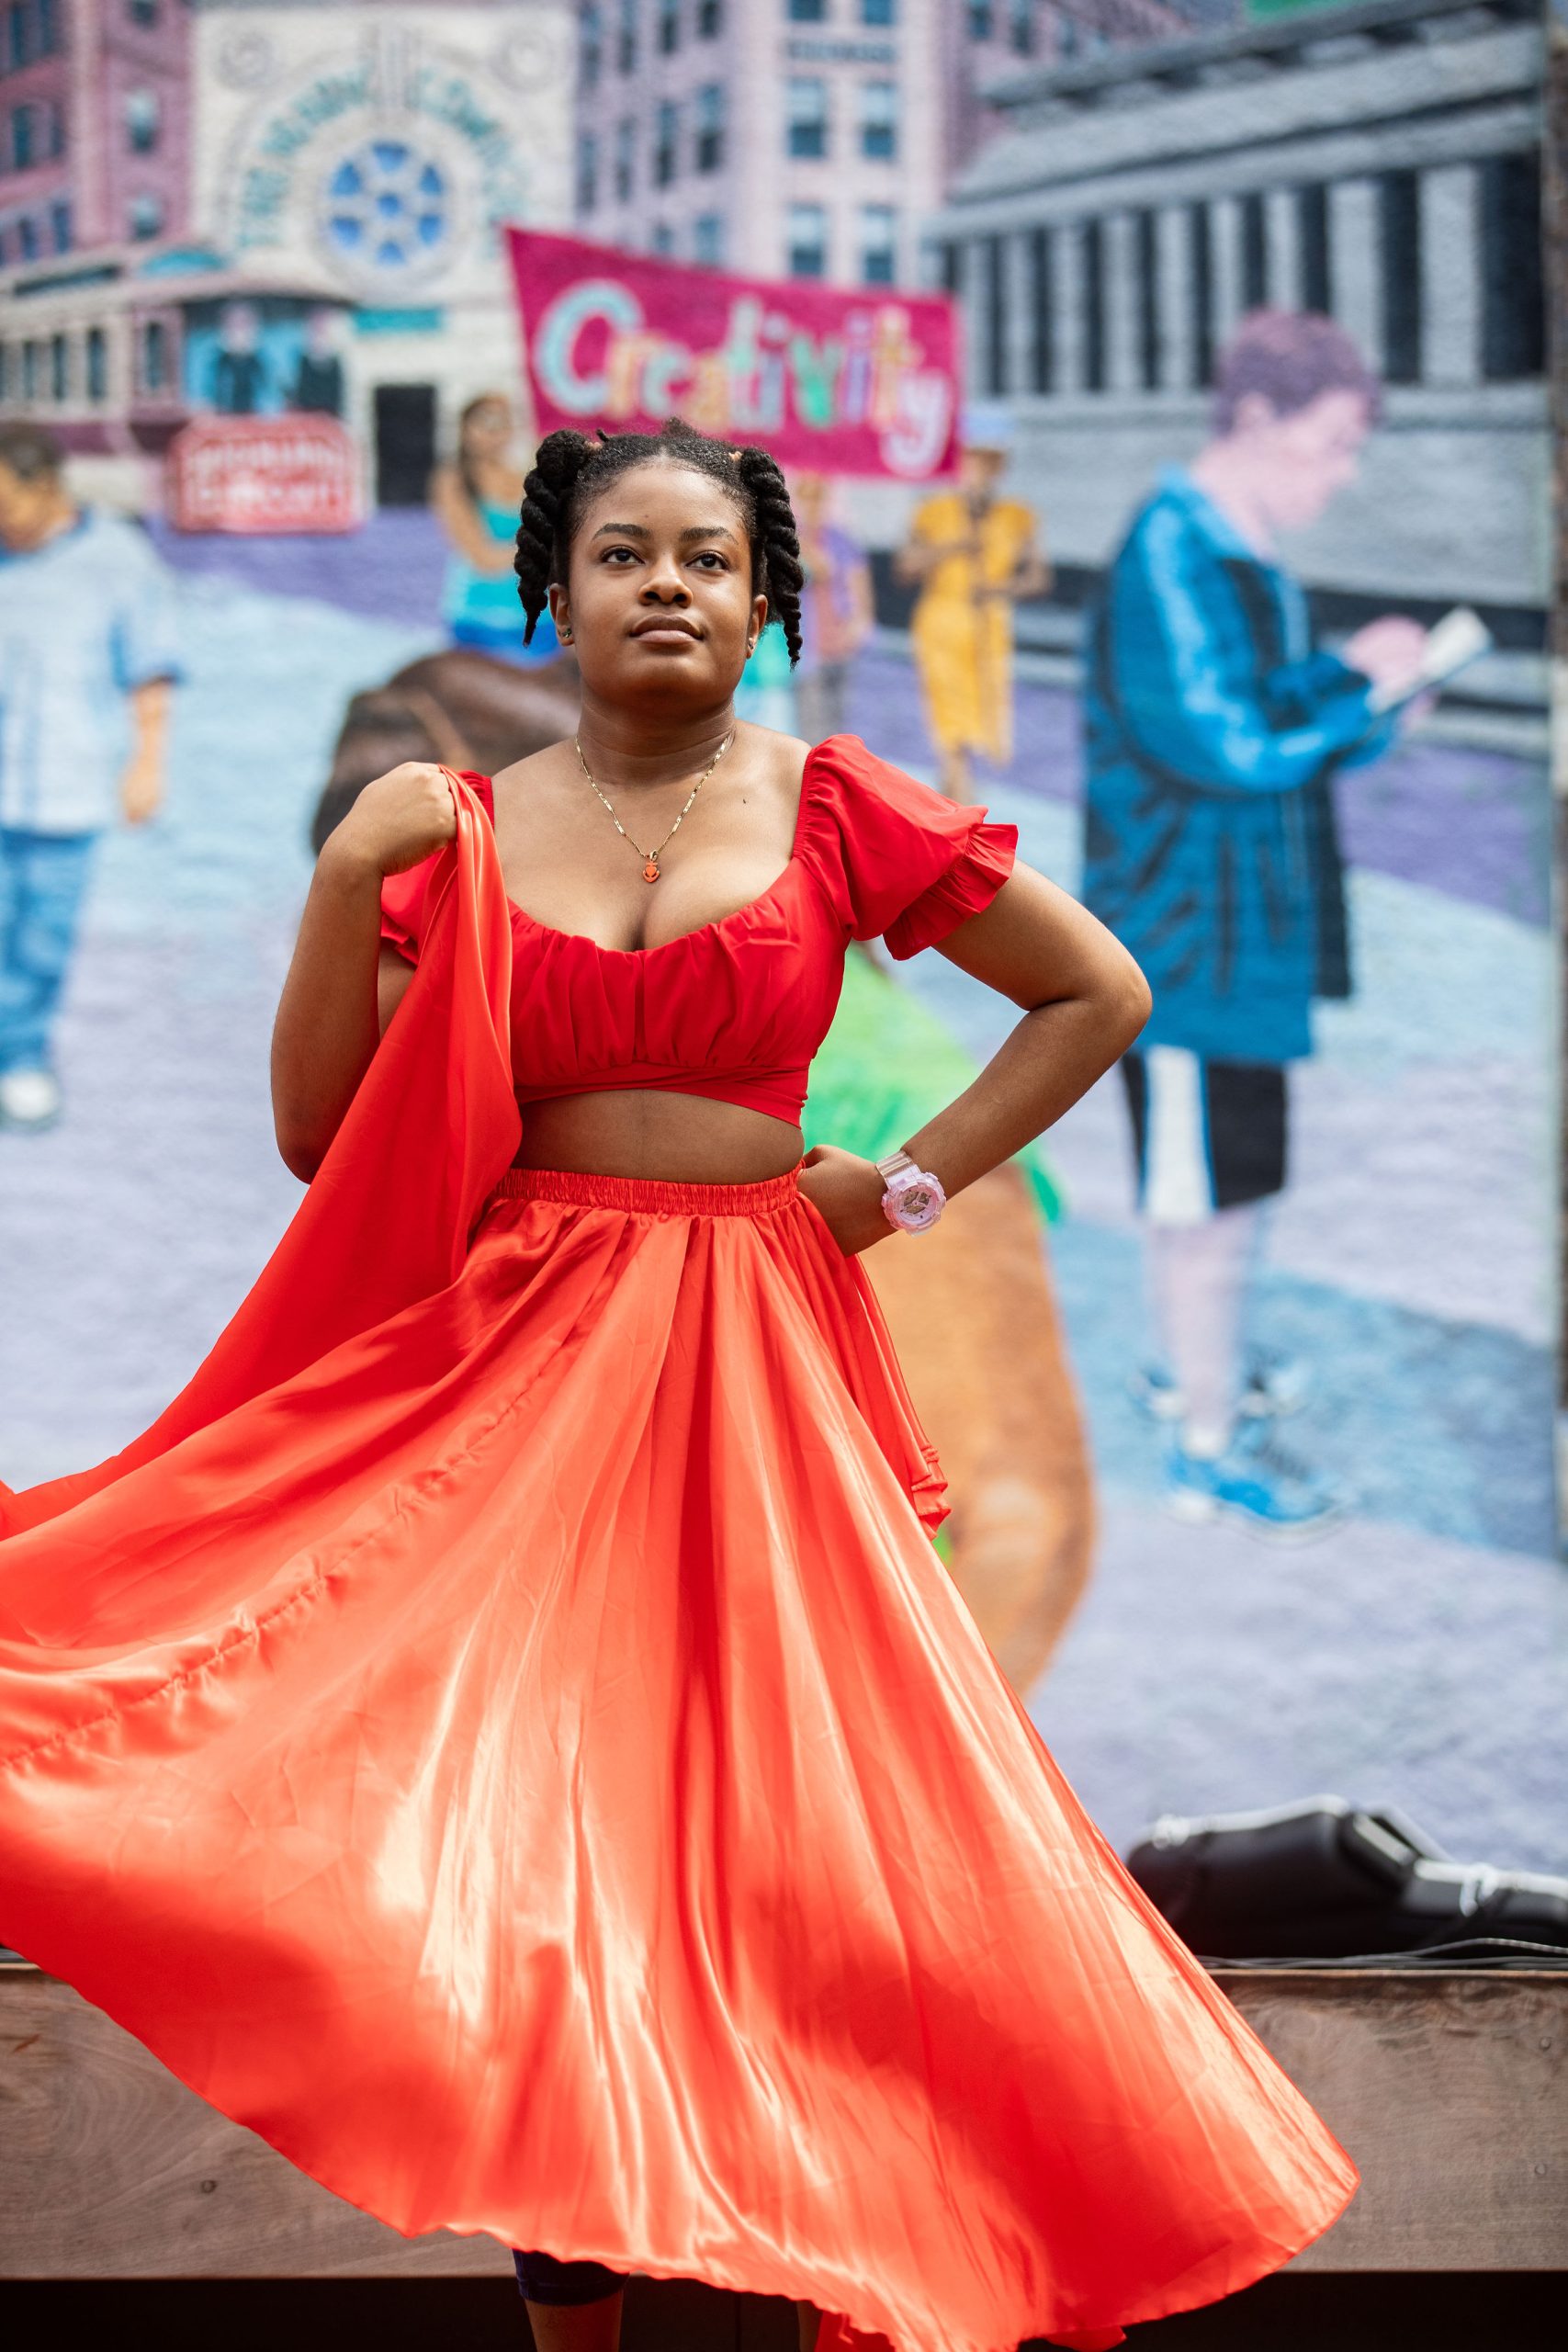 A young woman of color wears a red dress and dances at Lynnside out